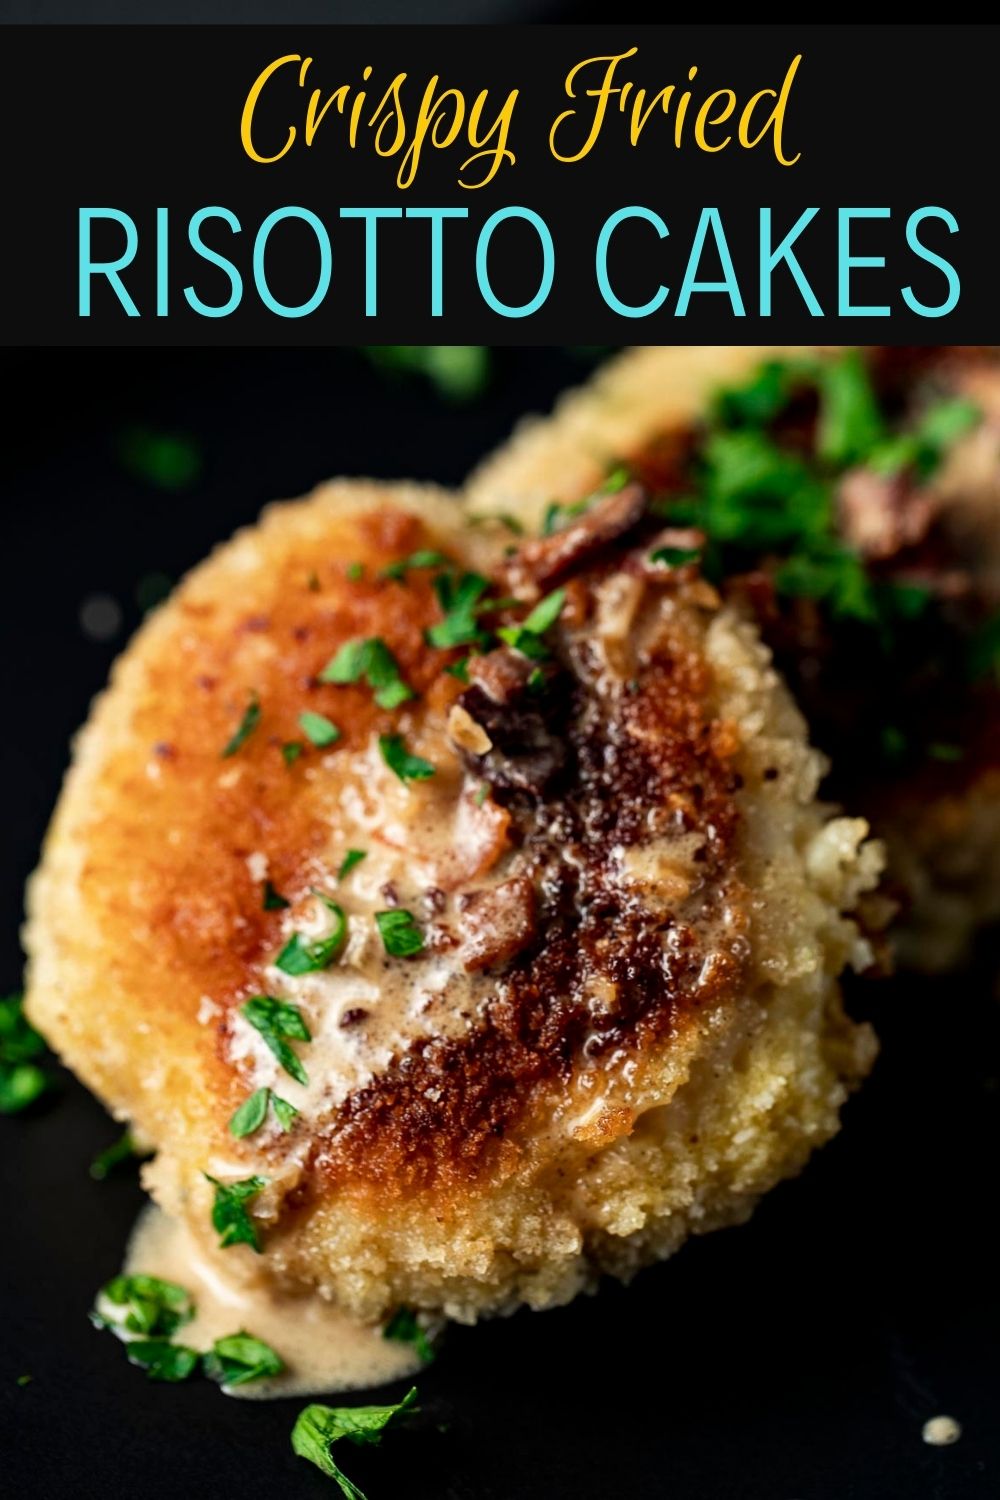 Crispy Fried Risotto Cakes with Pancetta Cream Sauce